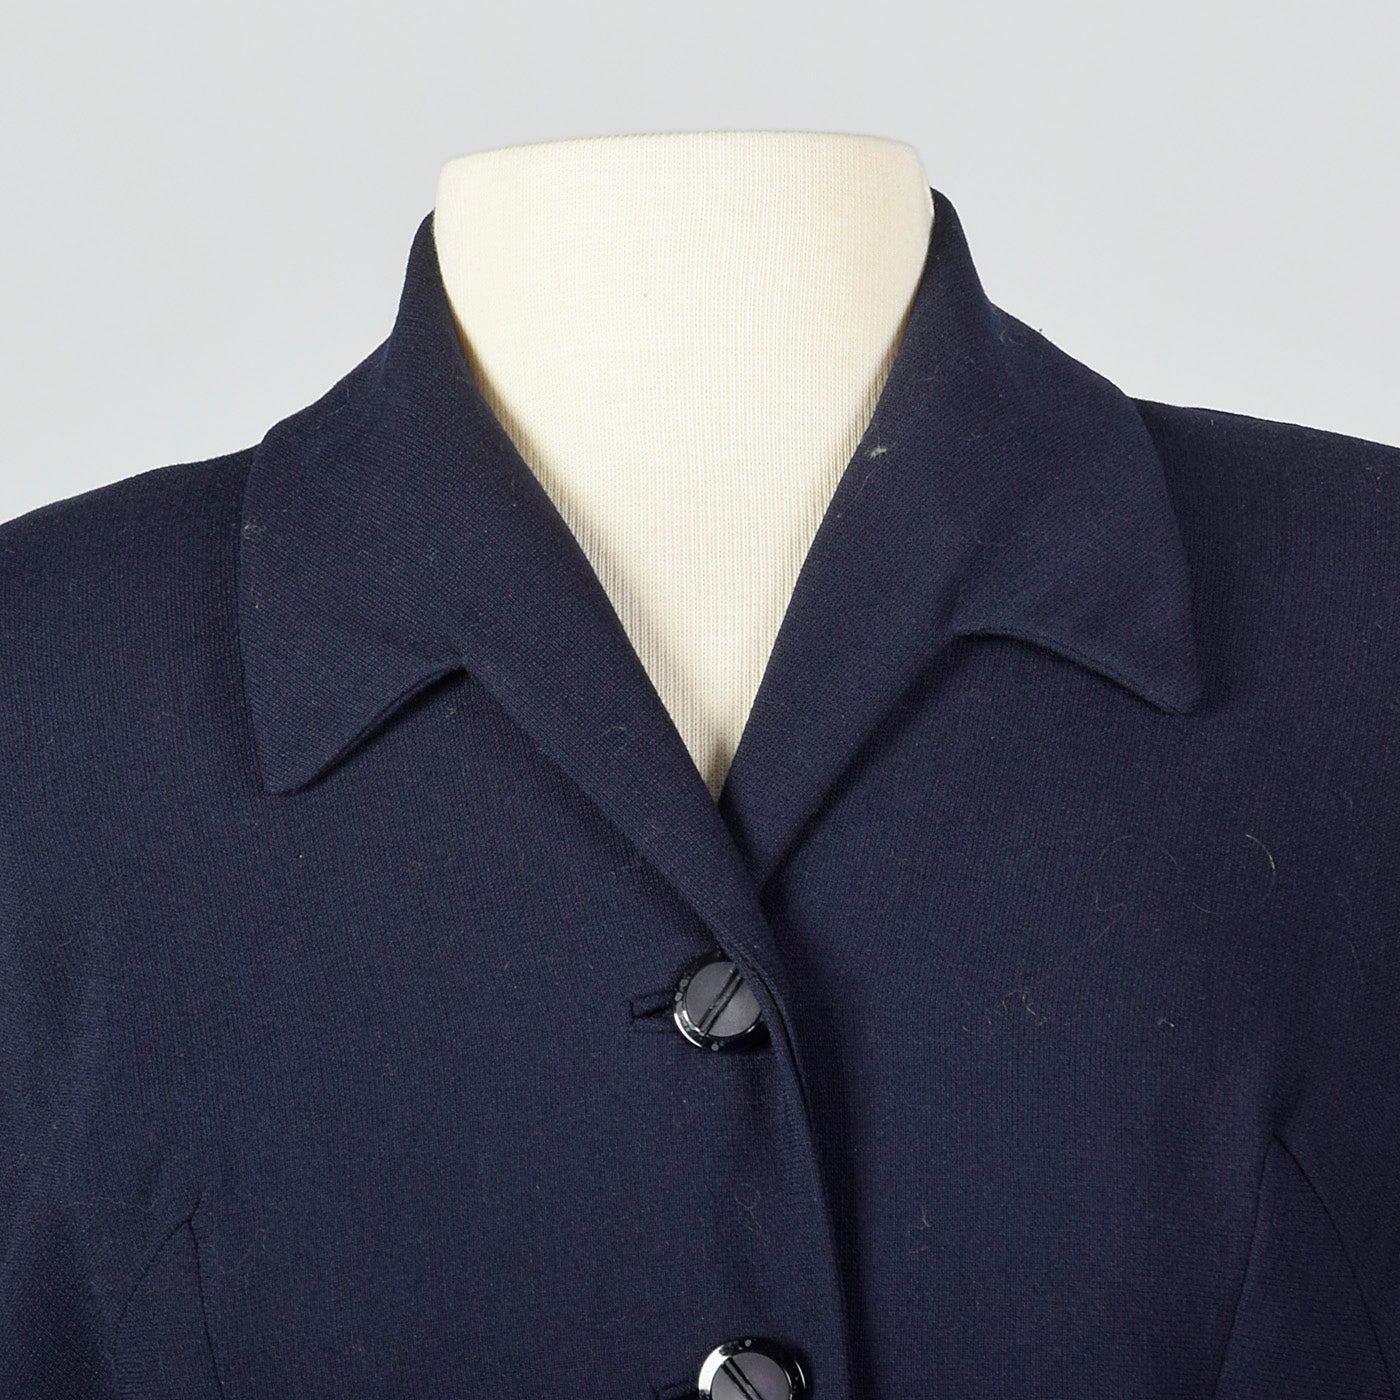 1950s Navy Blue Jacket with Fitted Waist